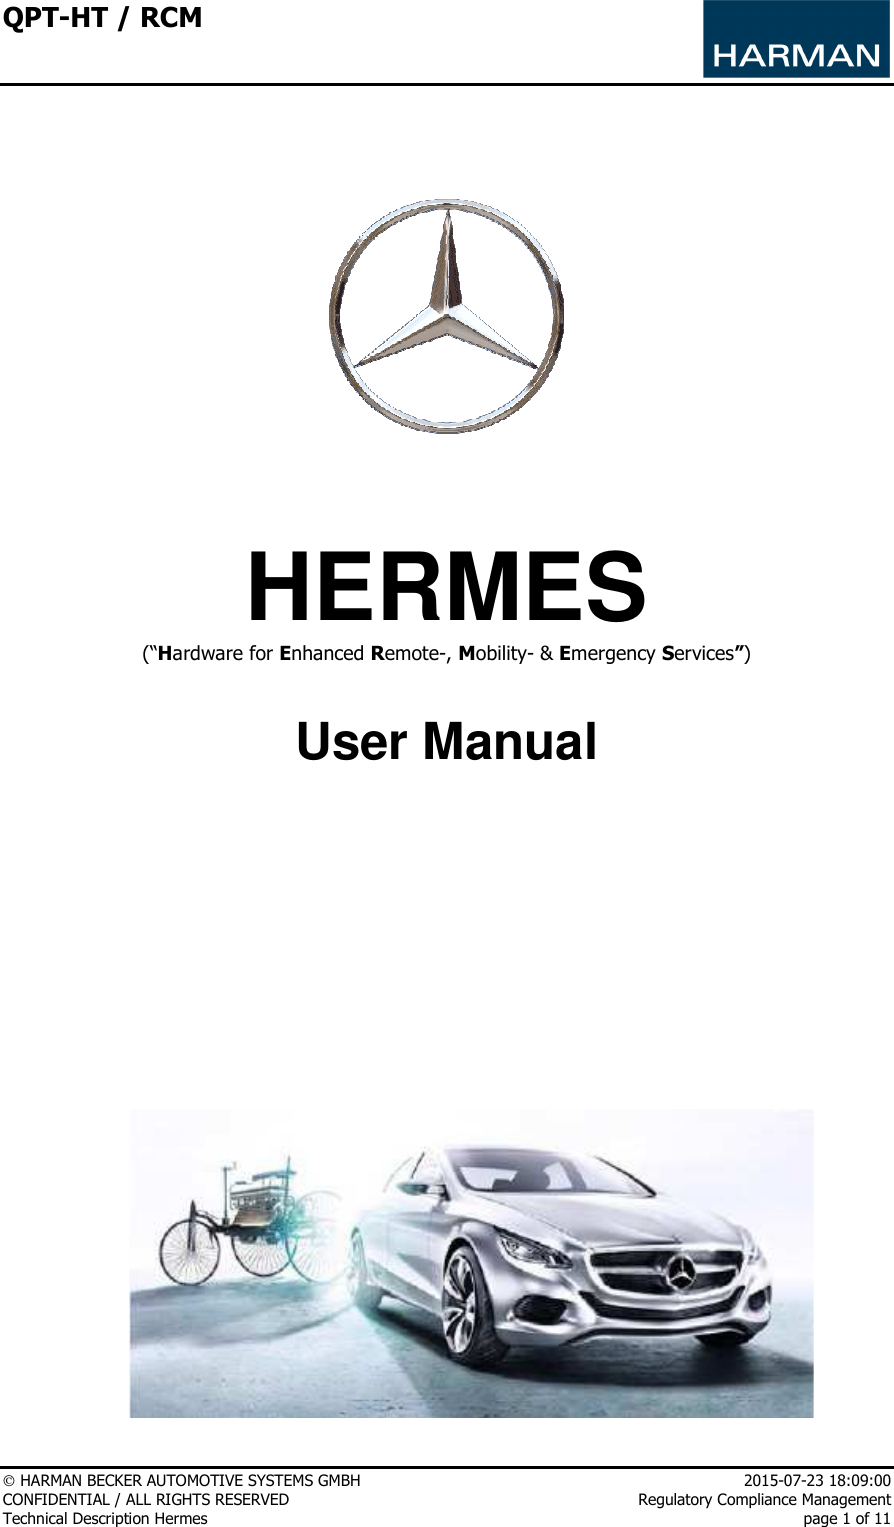 QPT-HT / RCM      HARMAN BECKER AUTOMOTIVE SYSTEMS GMBH    2015-07-23 18:09:00 CONFIDENTIAL / ALL RIGHTS RESERVED     Regulatory Compliance Management Technical Description Hermes    page 1 of 11      HERMES (“Hardware for Enhanced Remote-, Mobility- &amp; Emergency Services”)   User Manual                   